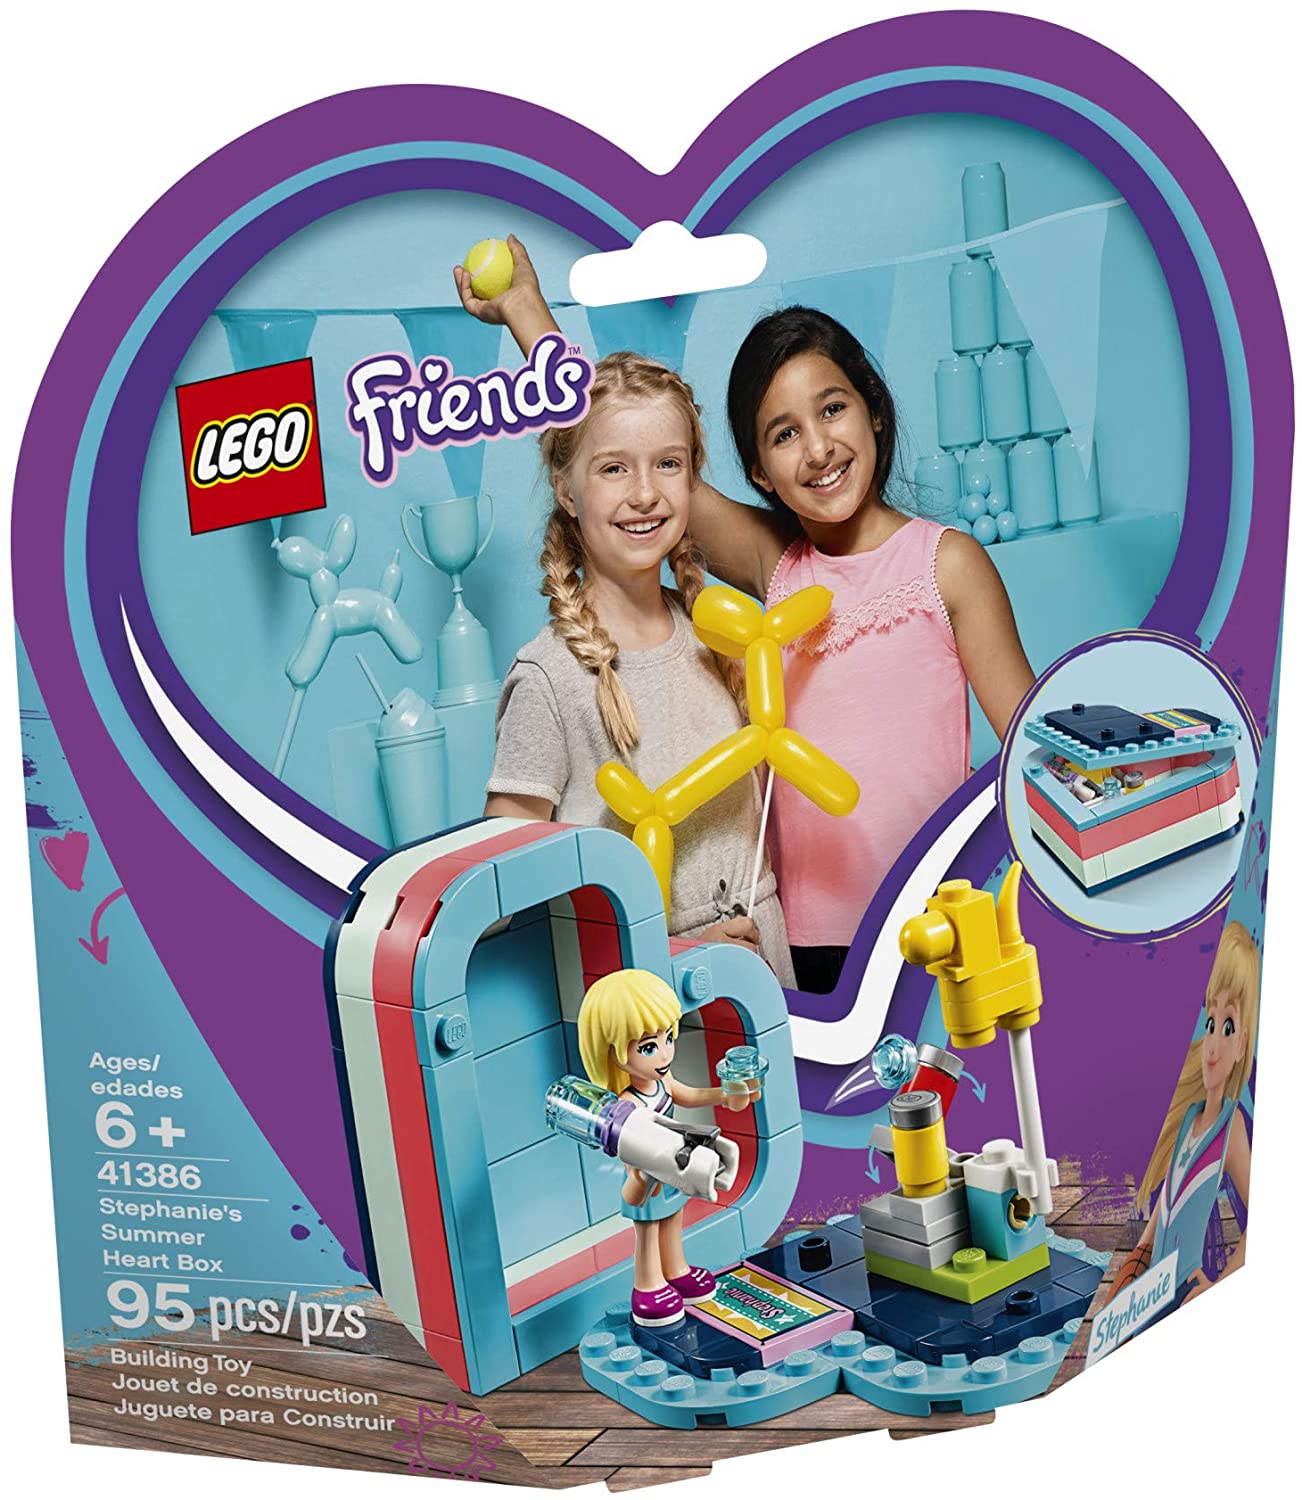 LEGO Aged 6 Plus Friends Stephanies Summer Heart Box Of 95 Piece Sets